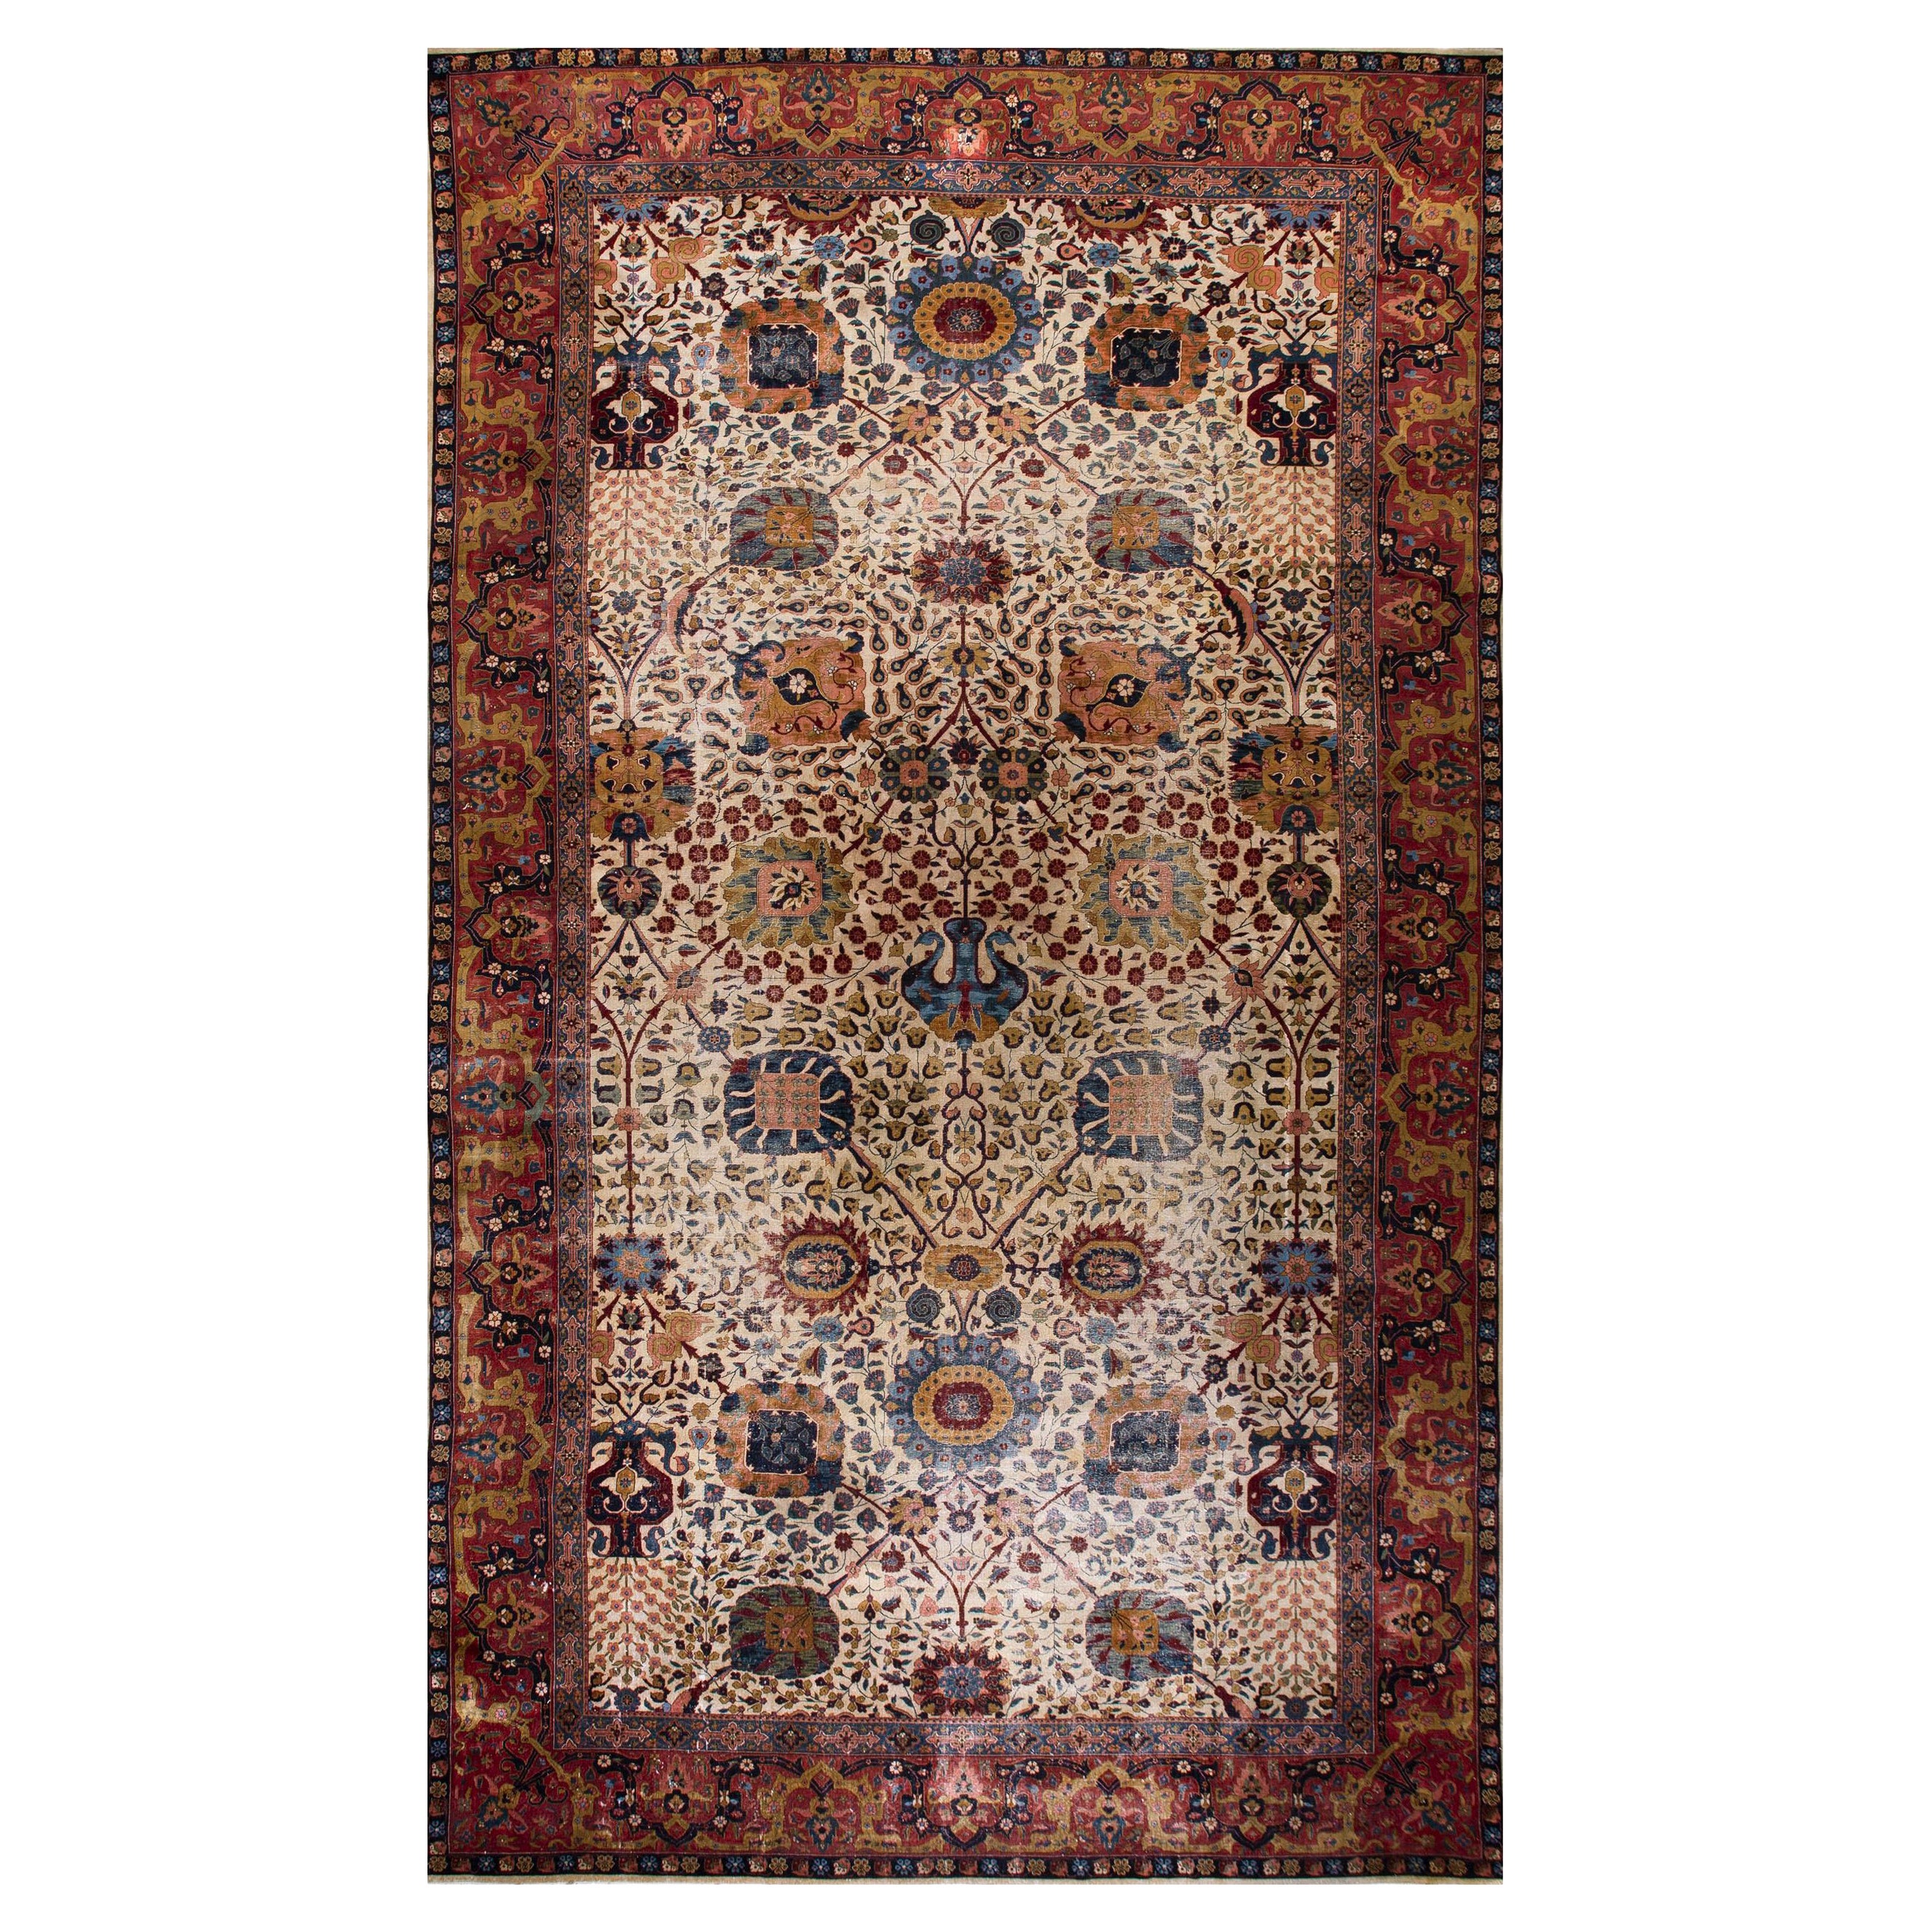 Early 20th Century Indian Lahore Carpet ( 11' x 18'10'' - 335 x 575 )